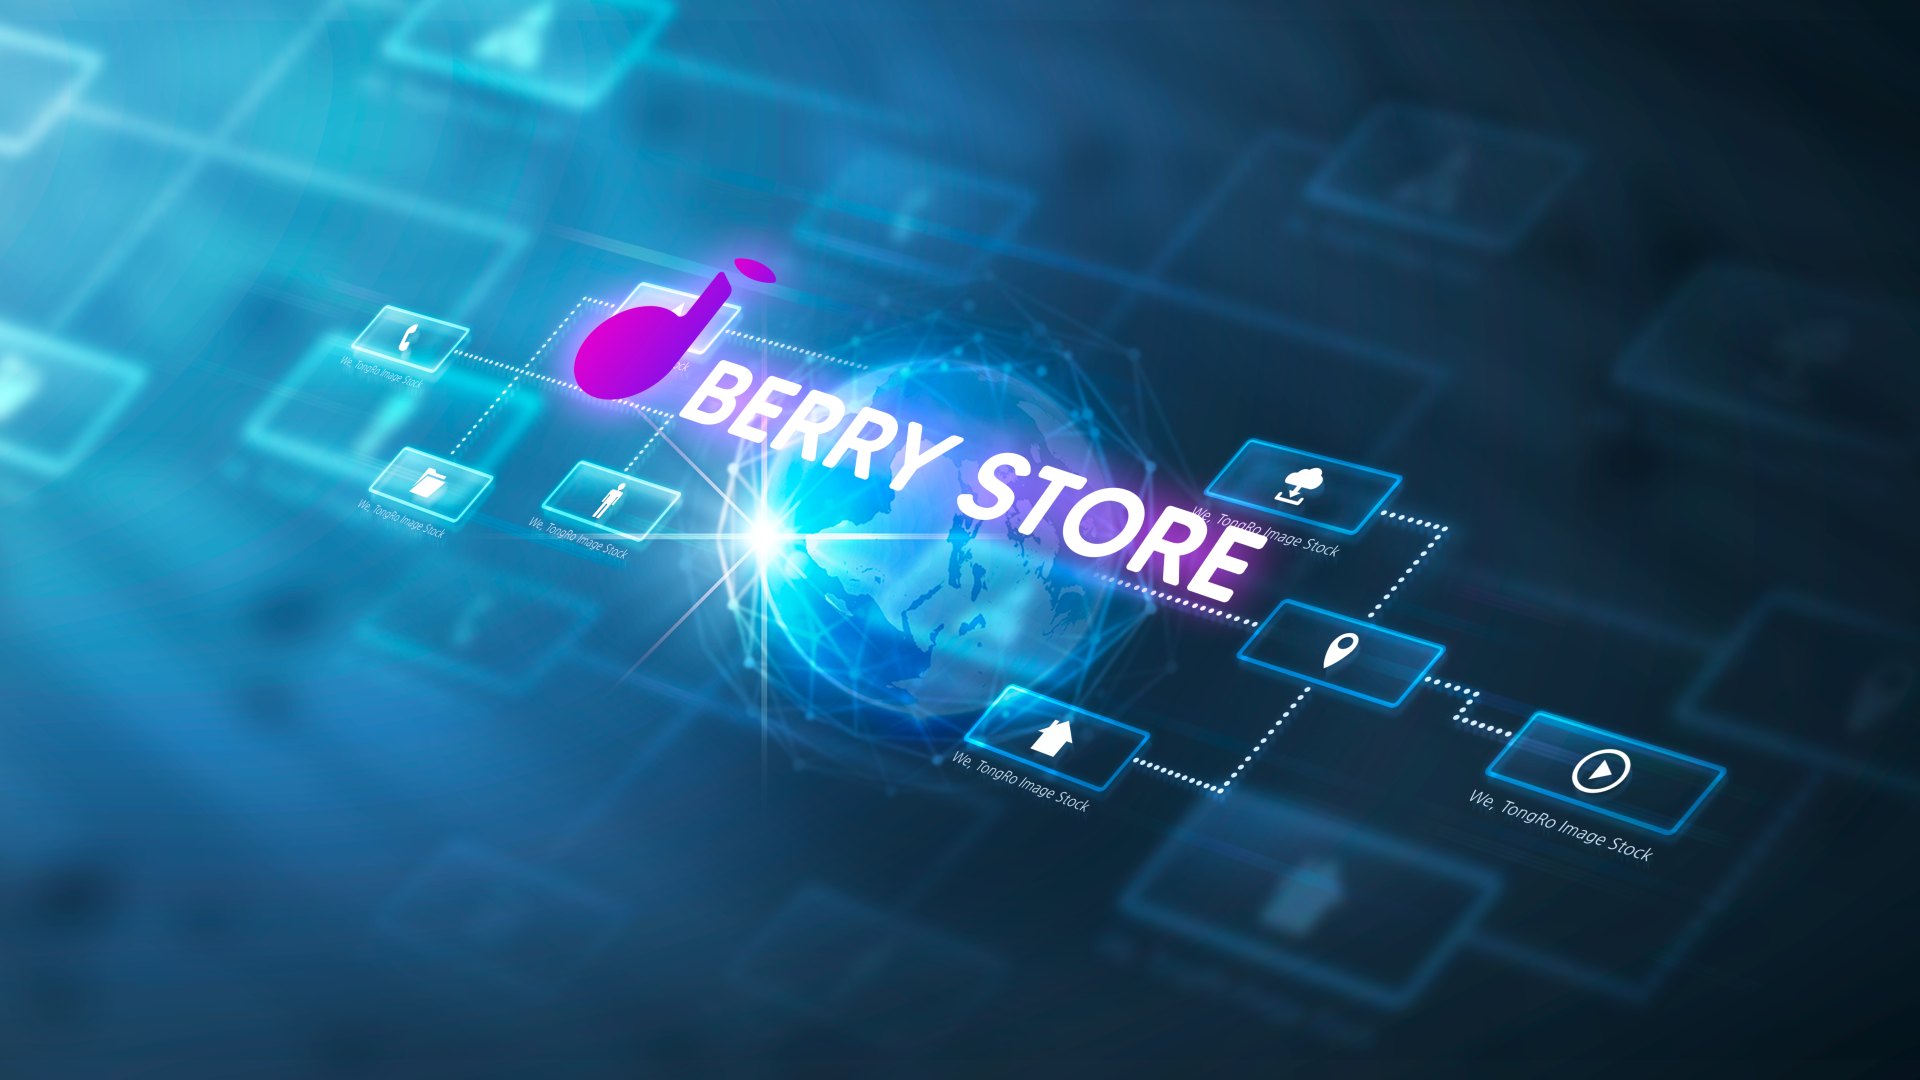 BerryStore 3.0 plans to adopt BNB Chain